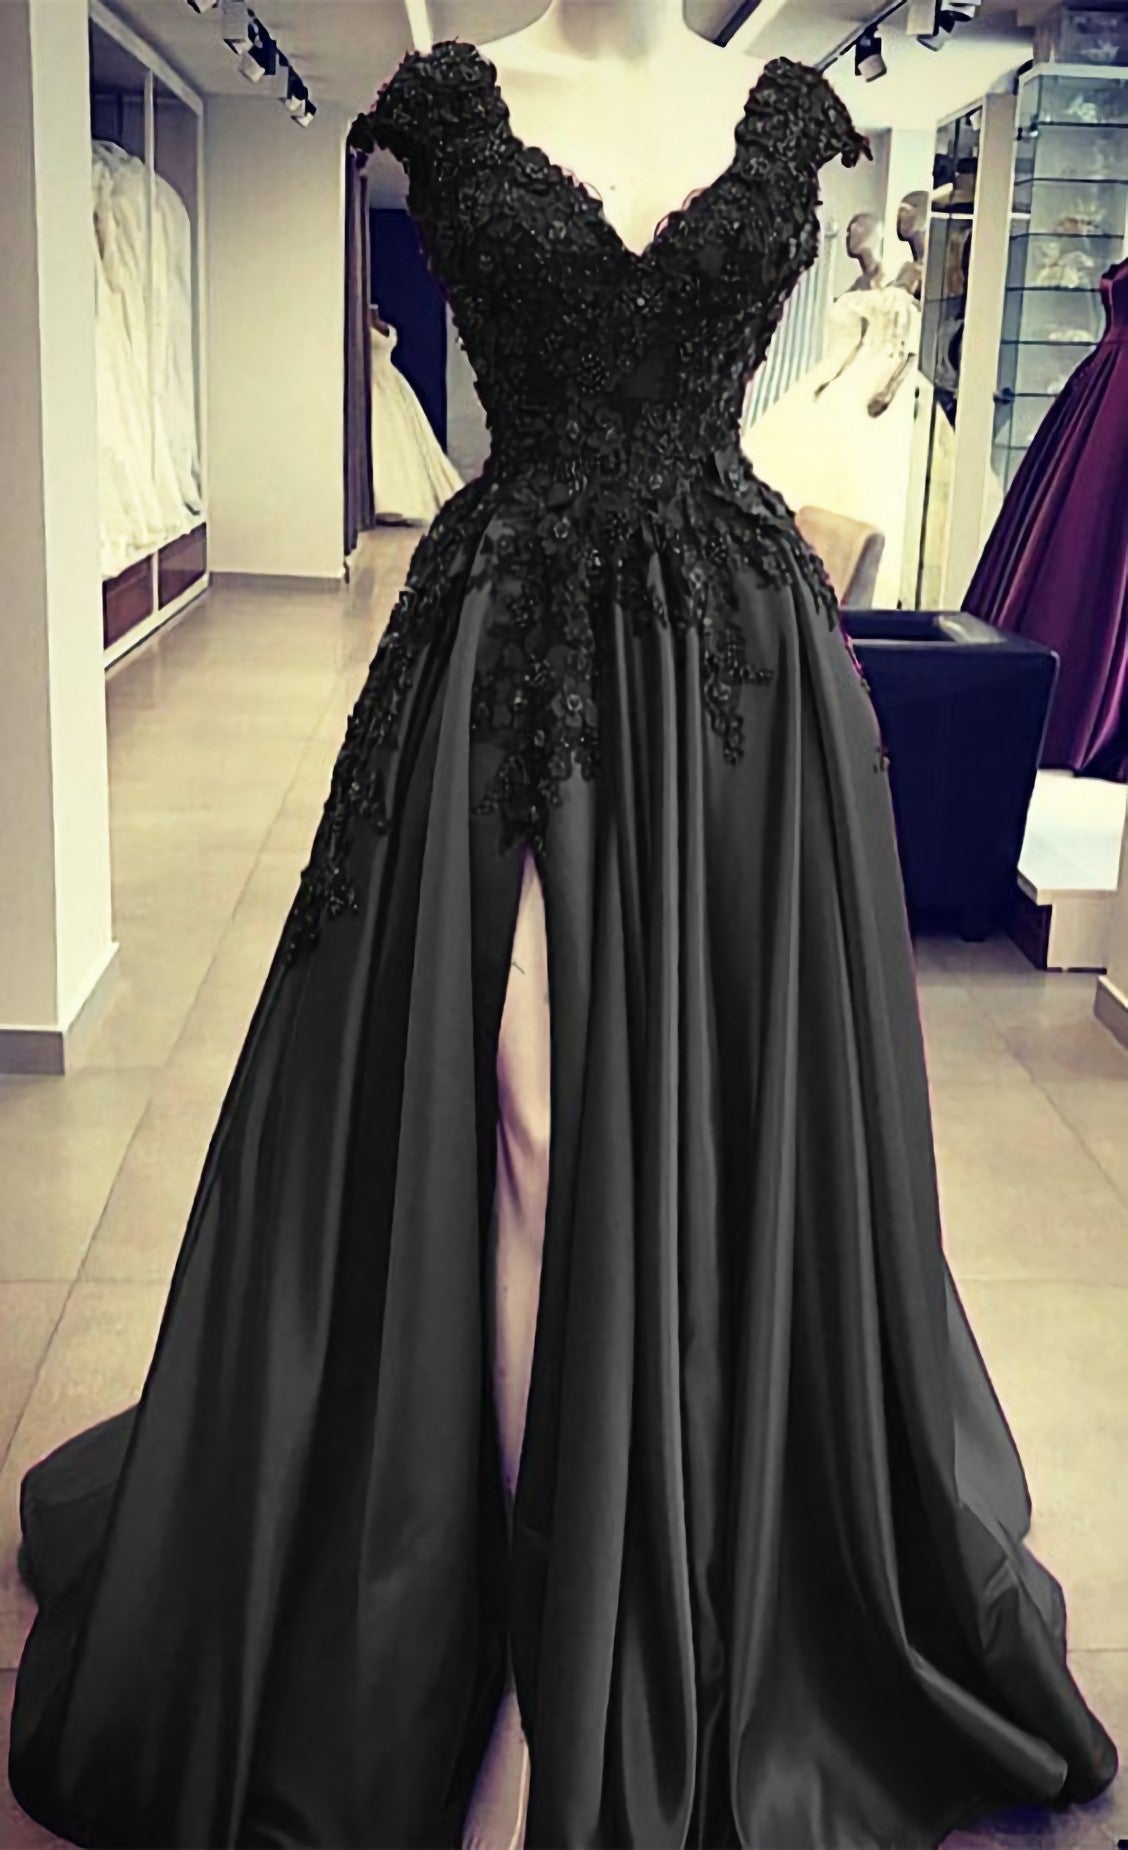 Black Satin Slit Dresses, With Lace Embroidery Corset Prom Dresses outfit, Evening Dresses Green